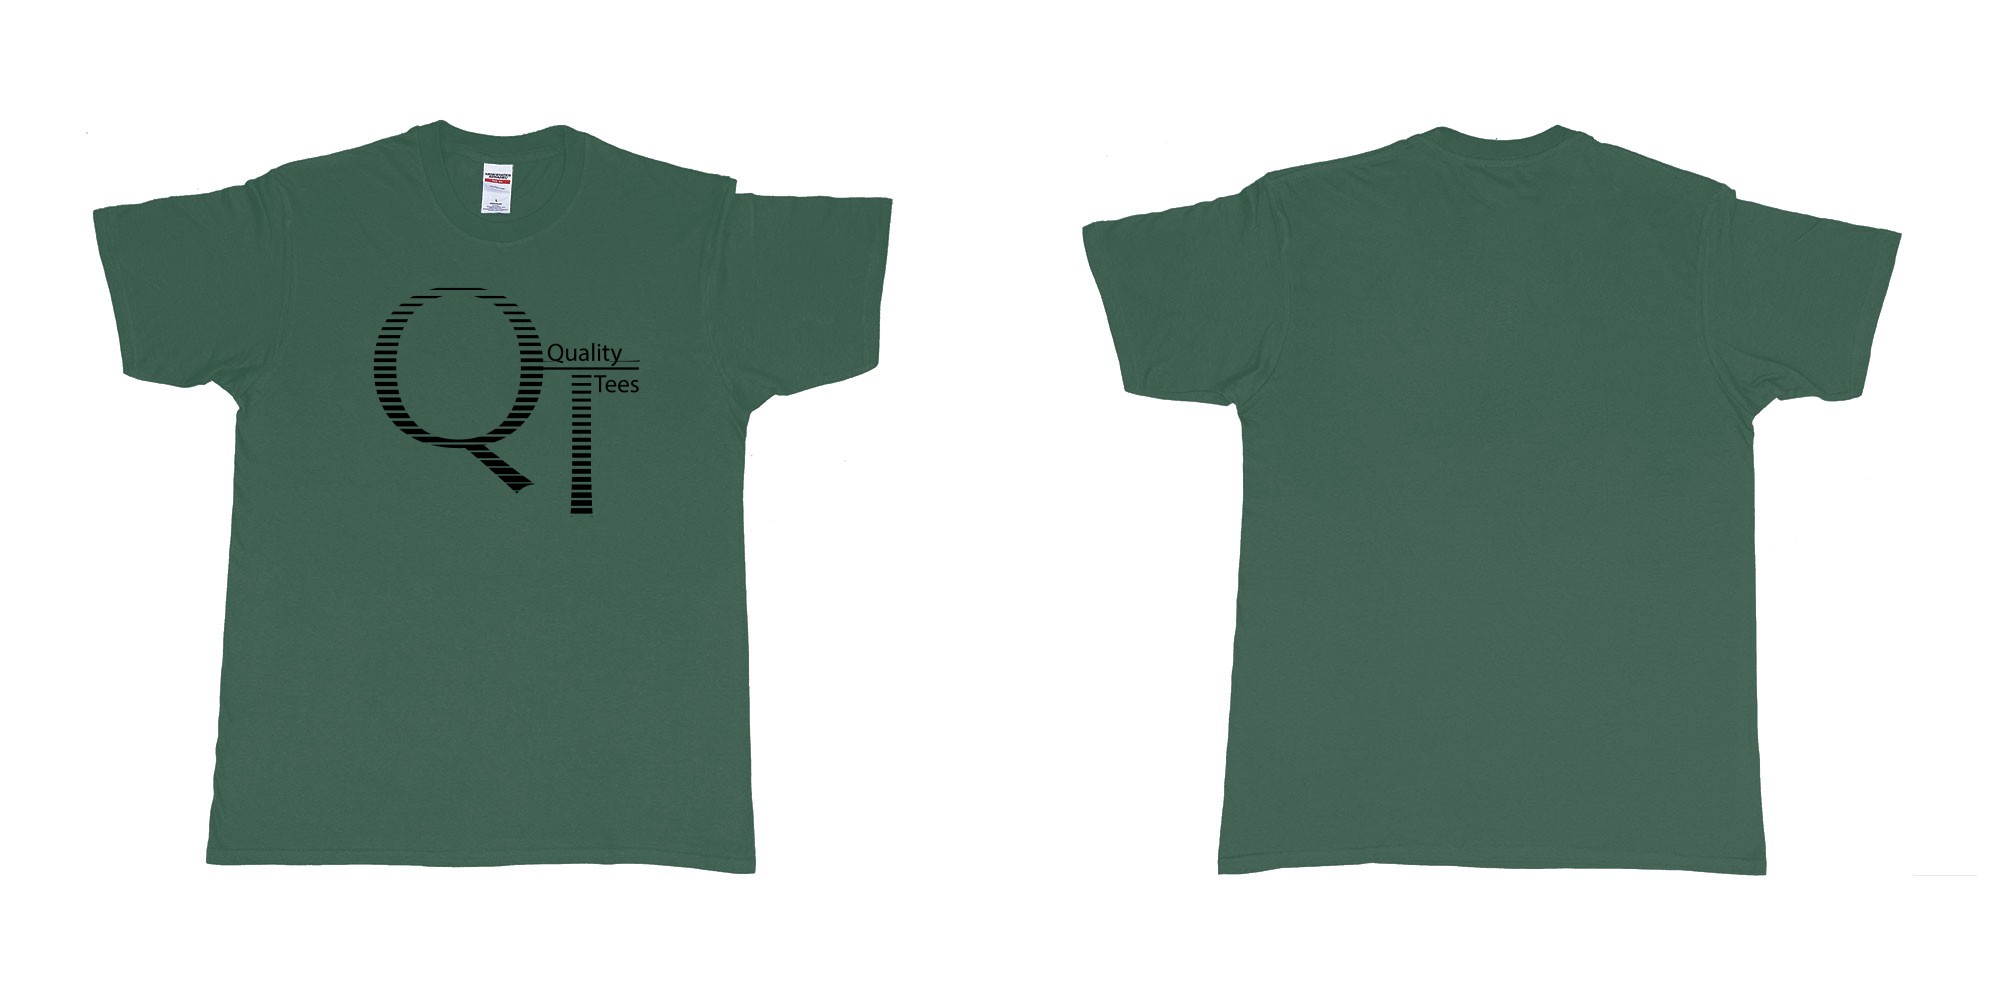 Custom tshirt design quality teeshirts in fabric color forest-green choice your own text made in Bali by The Pirate Way